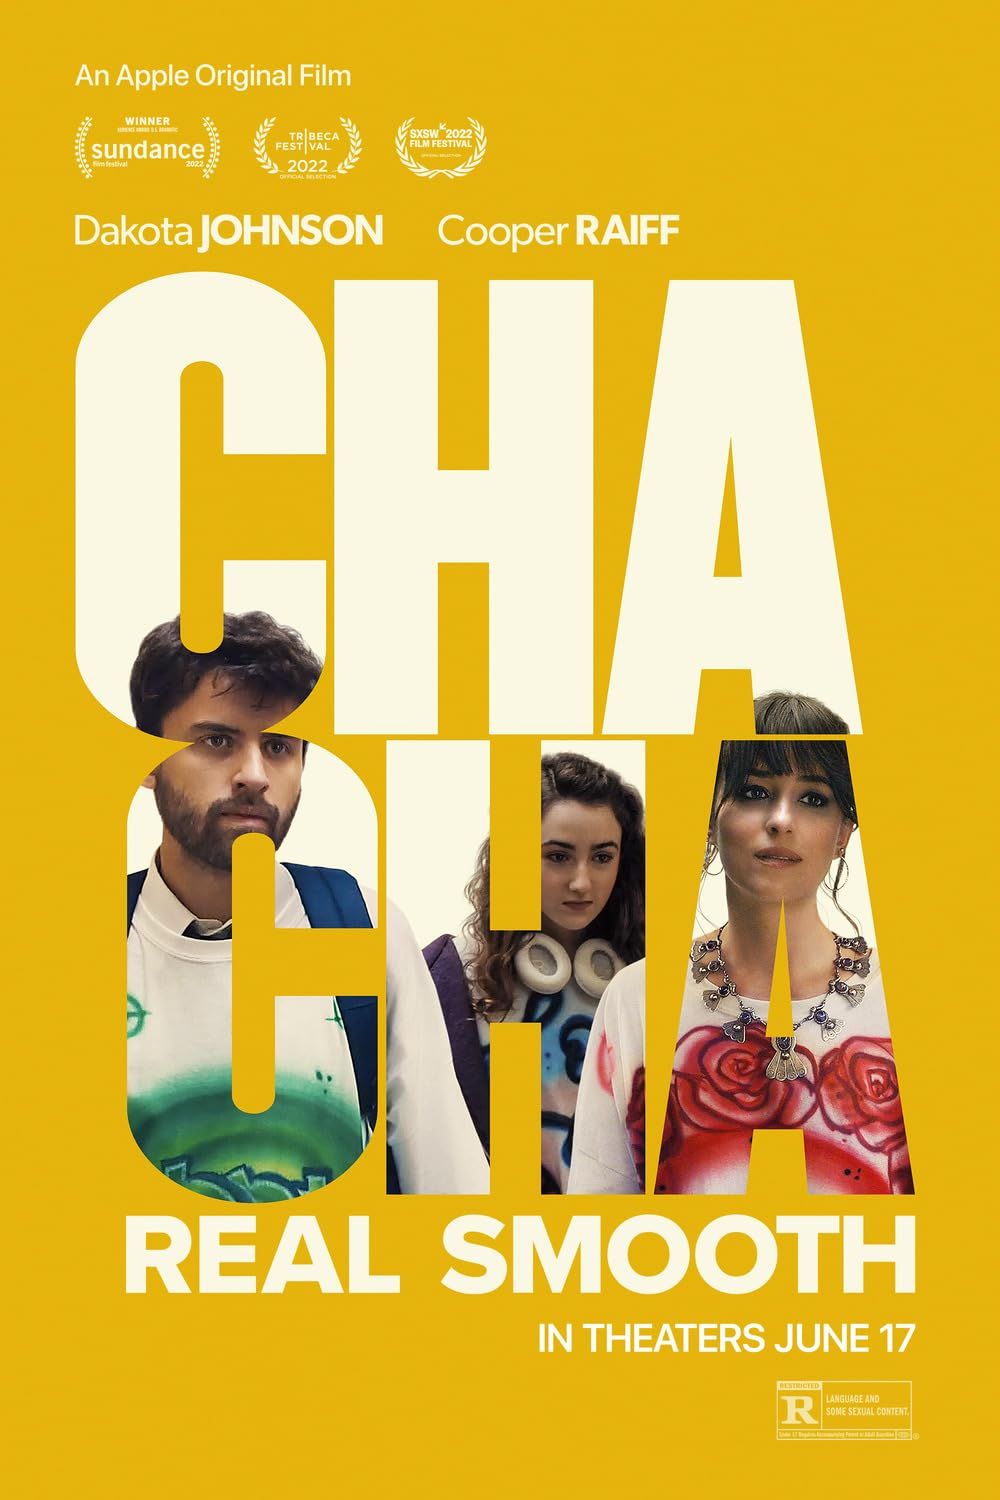 Cooper Raiff and Dakota Johnson in a poster of Cha Cha Real Smooth